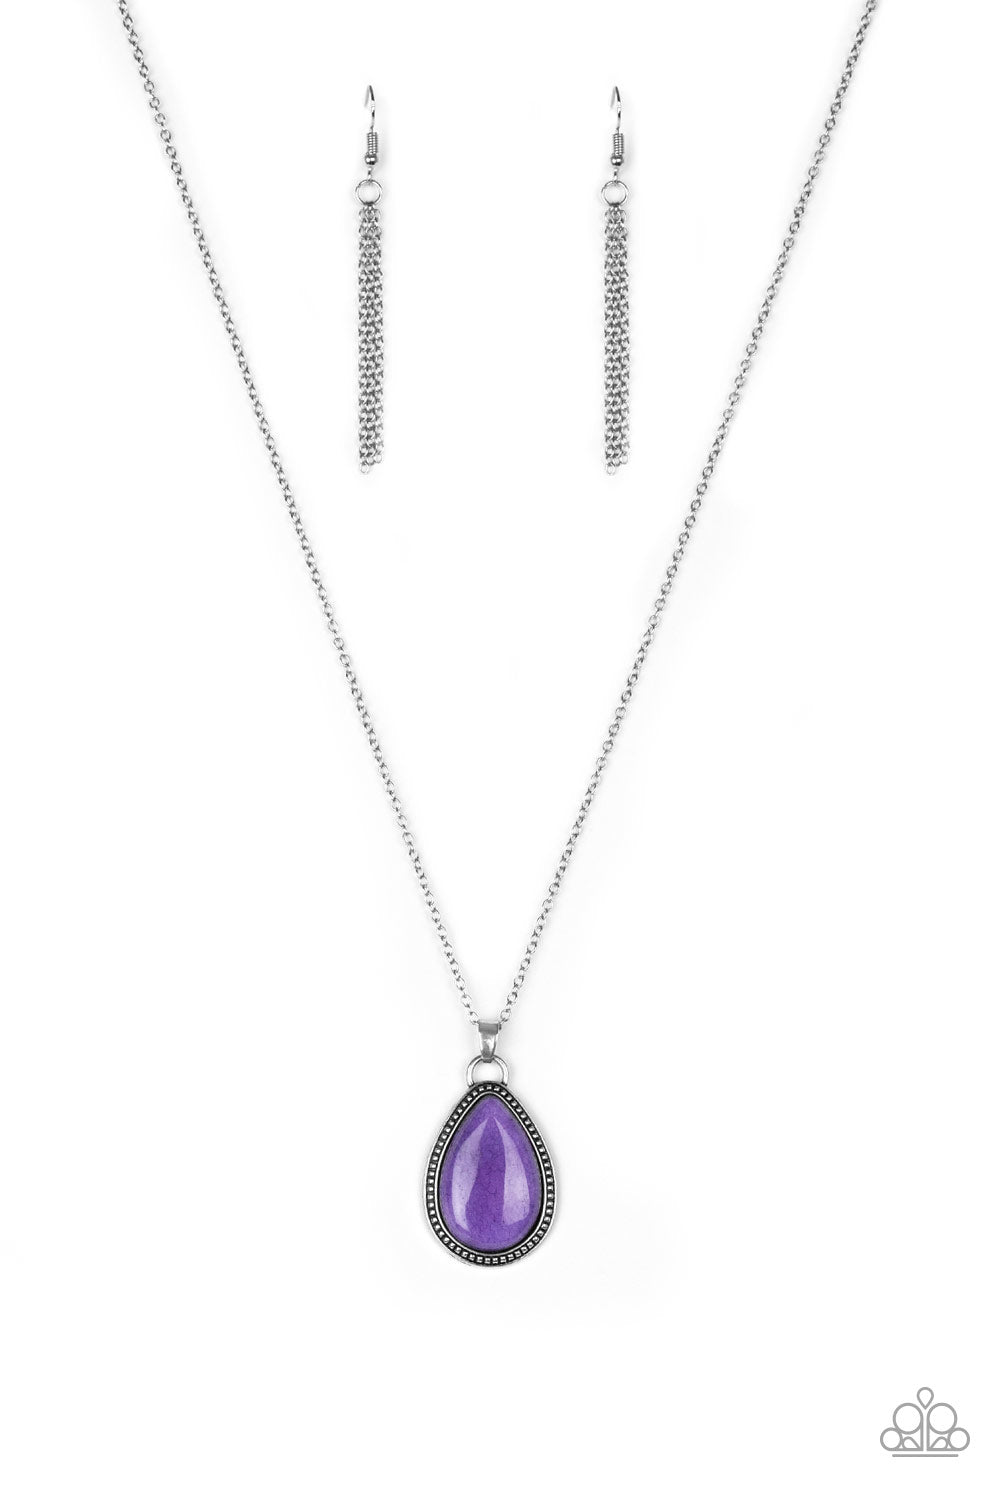 On The Home Frontier - Purple Necklace Set - Princess Glam Shop